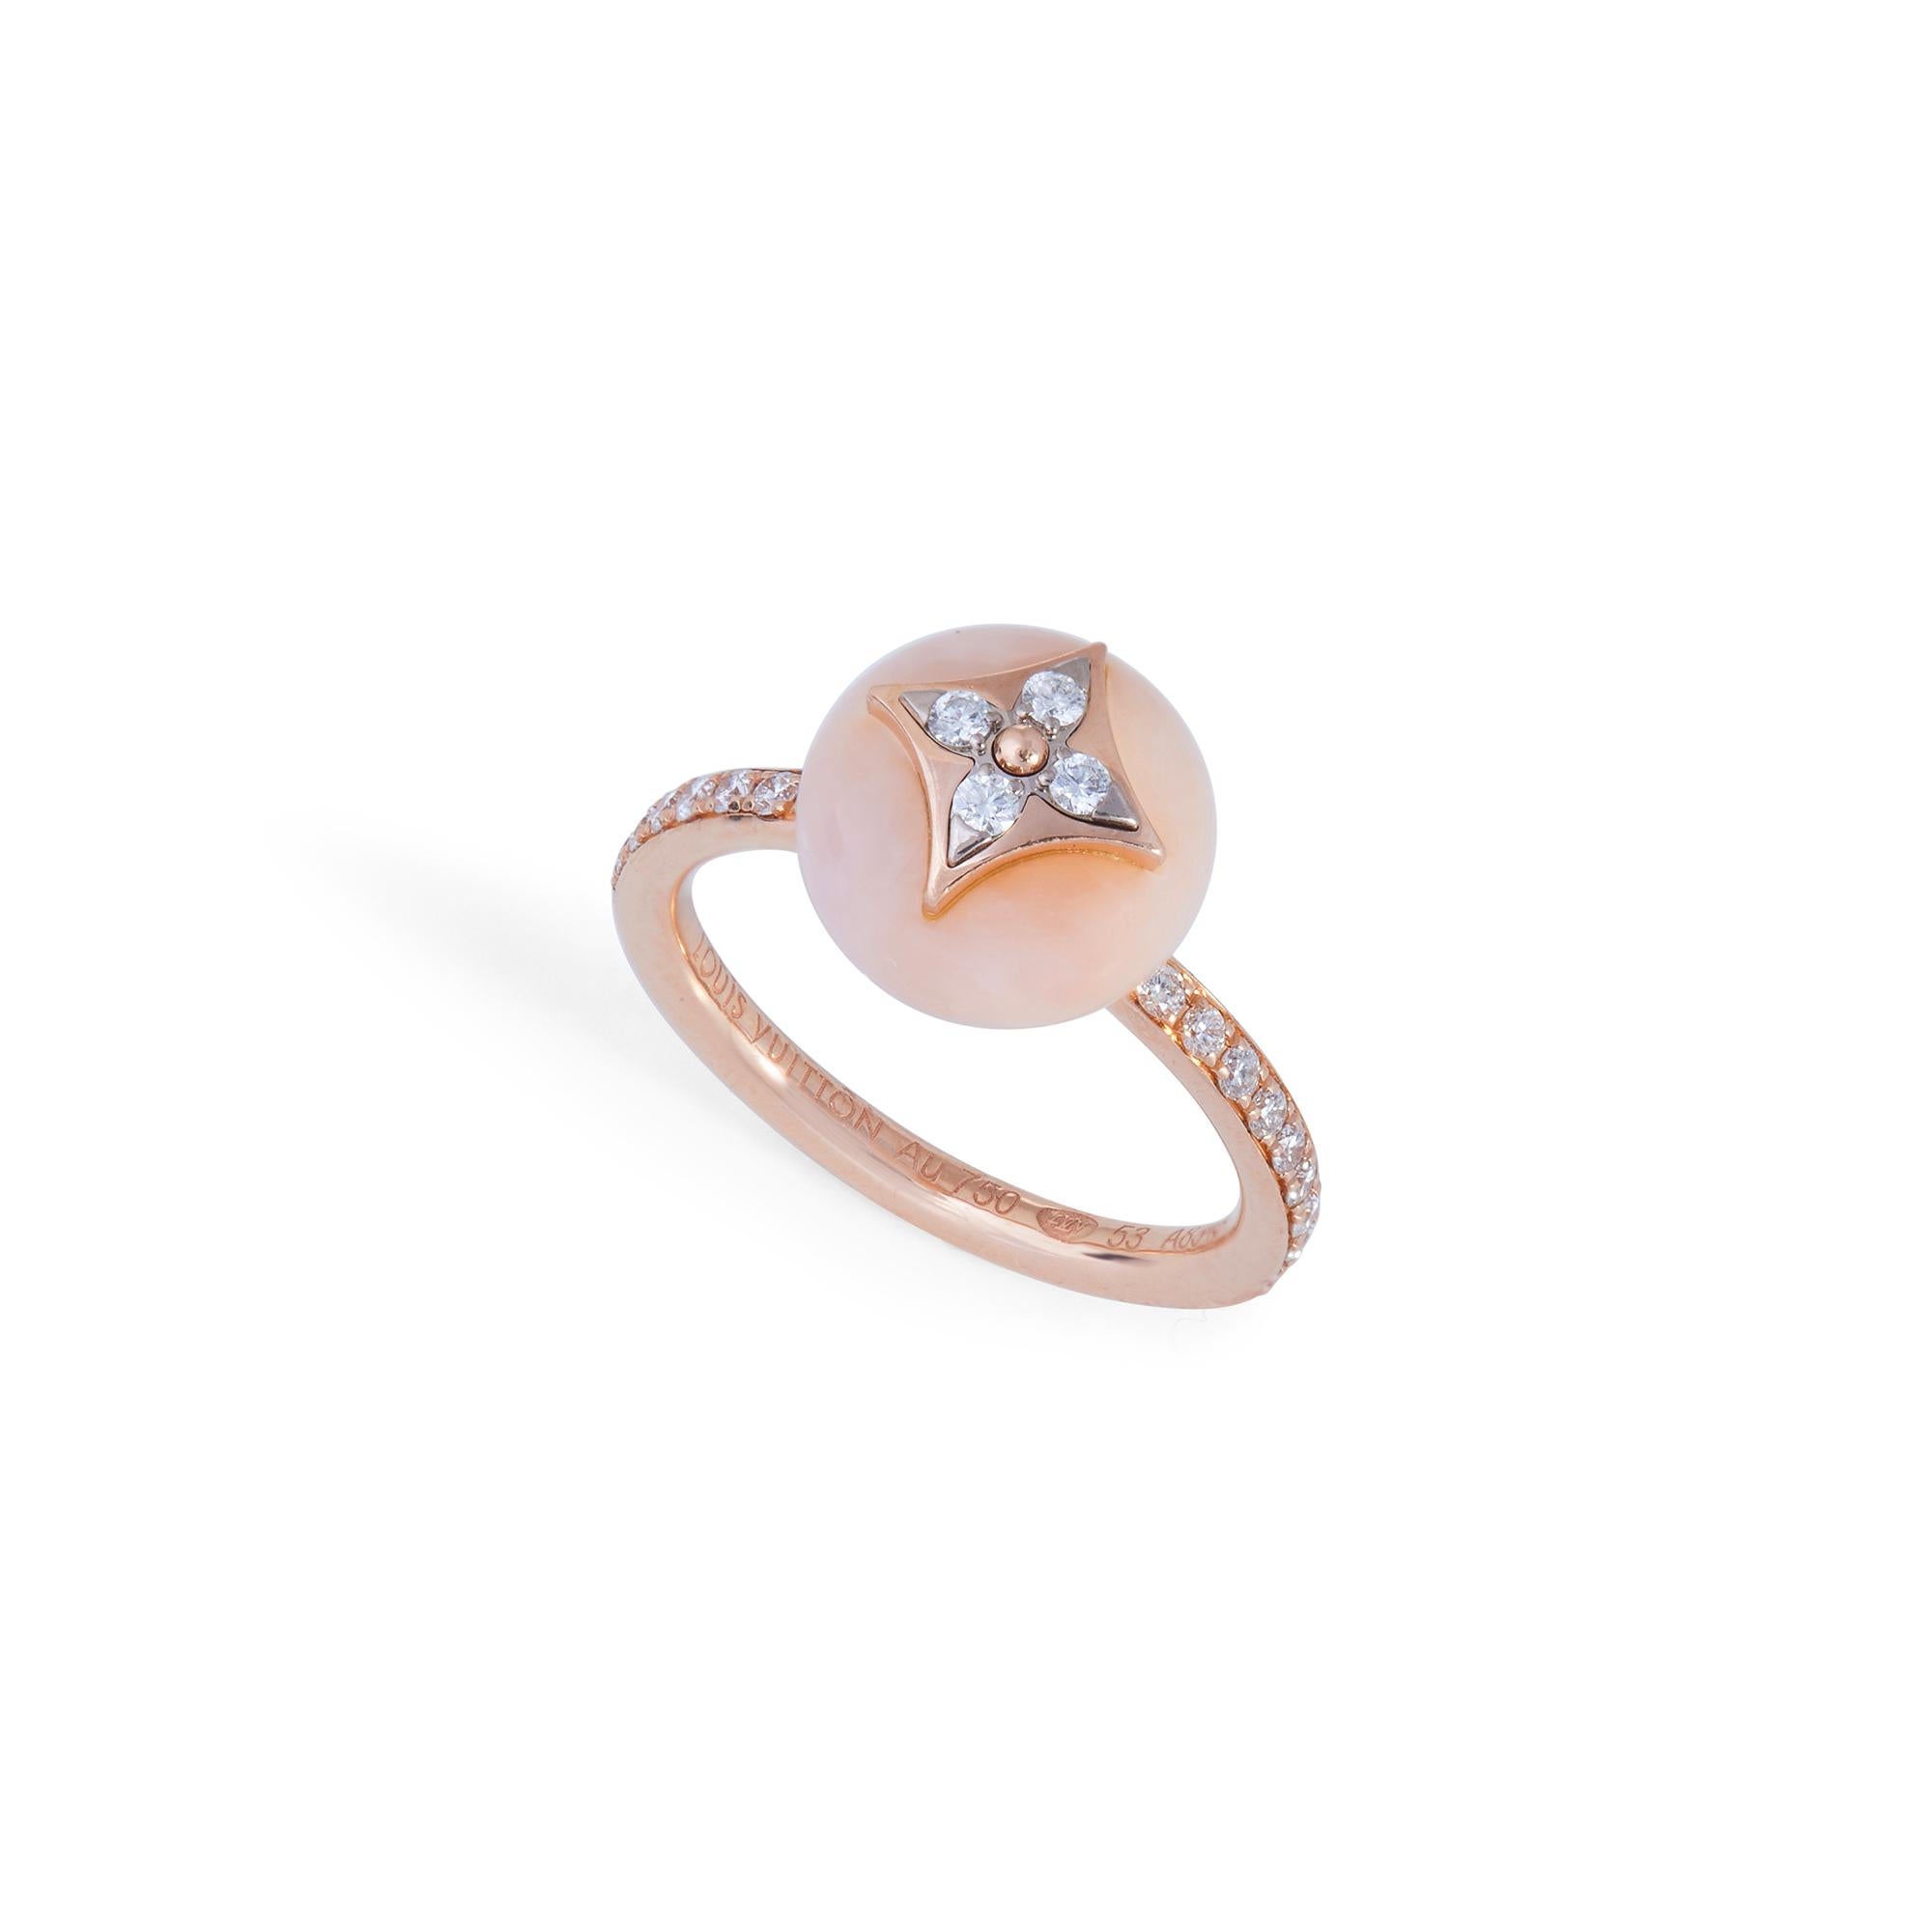 Authentic Louis Vuitton B Blossom ring crated in 18 karat rose and white gold.  The iconic Louis Vuitton monogram flower is surrounded by a rounded pink opal.  The band and monogram detail are set with approximately 0.2 carats of stunning round